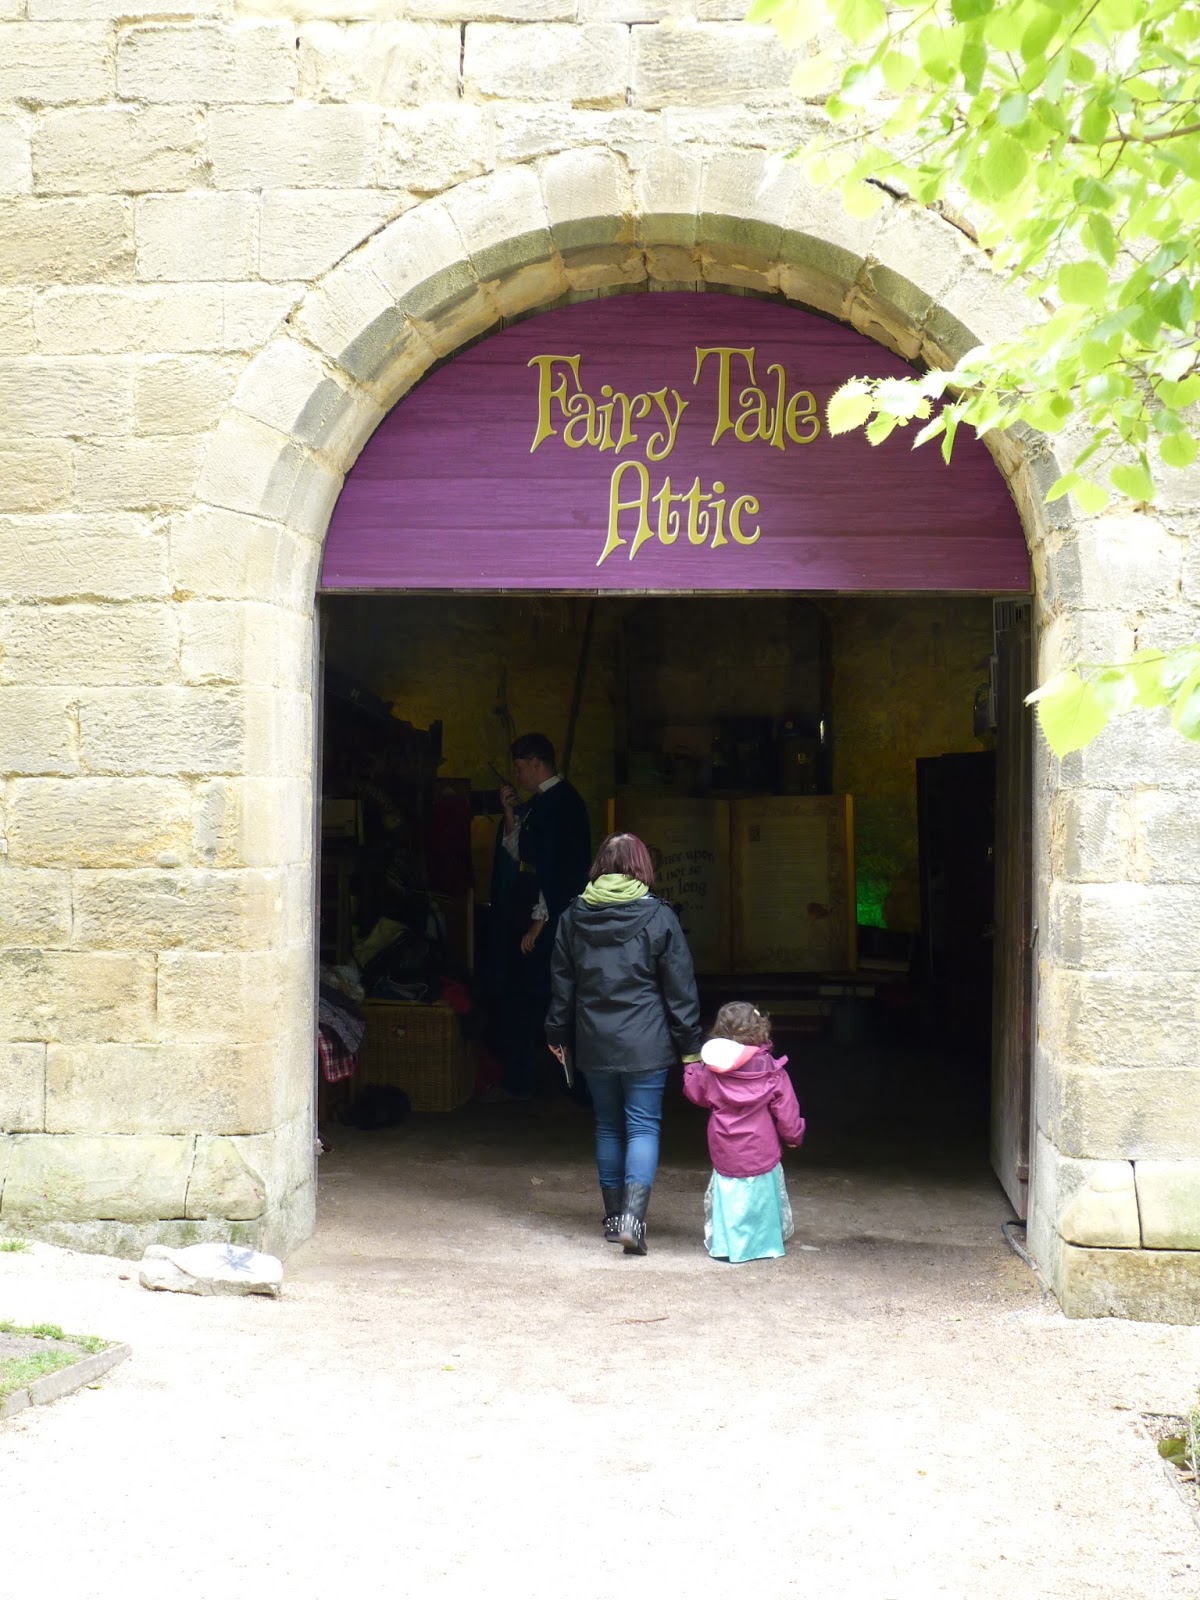 First of all we visited the Fairy Attic to meet the Prince, discuss the problem and potential strategies and get our clues (and costumes if you are not a real princess like me!)